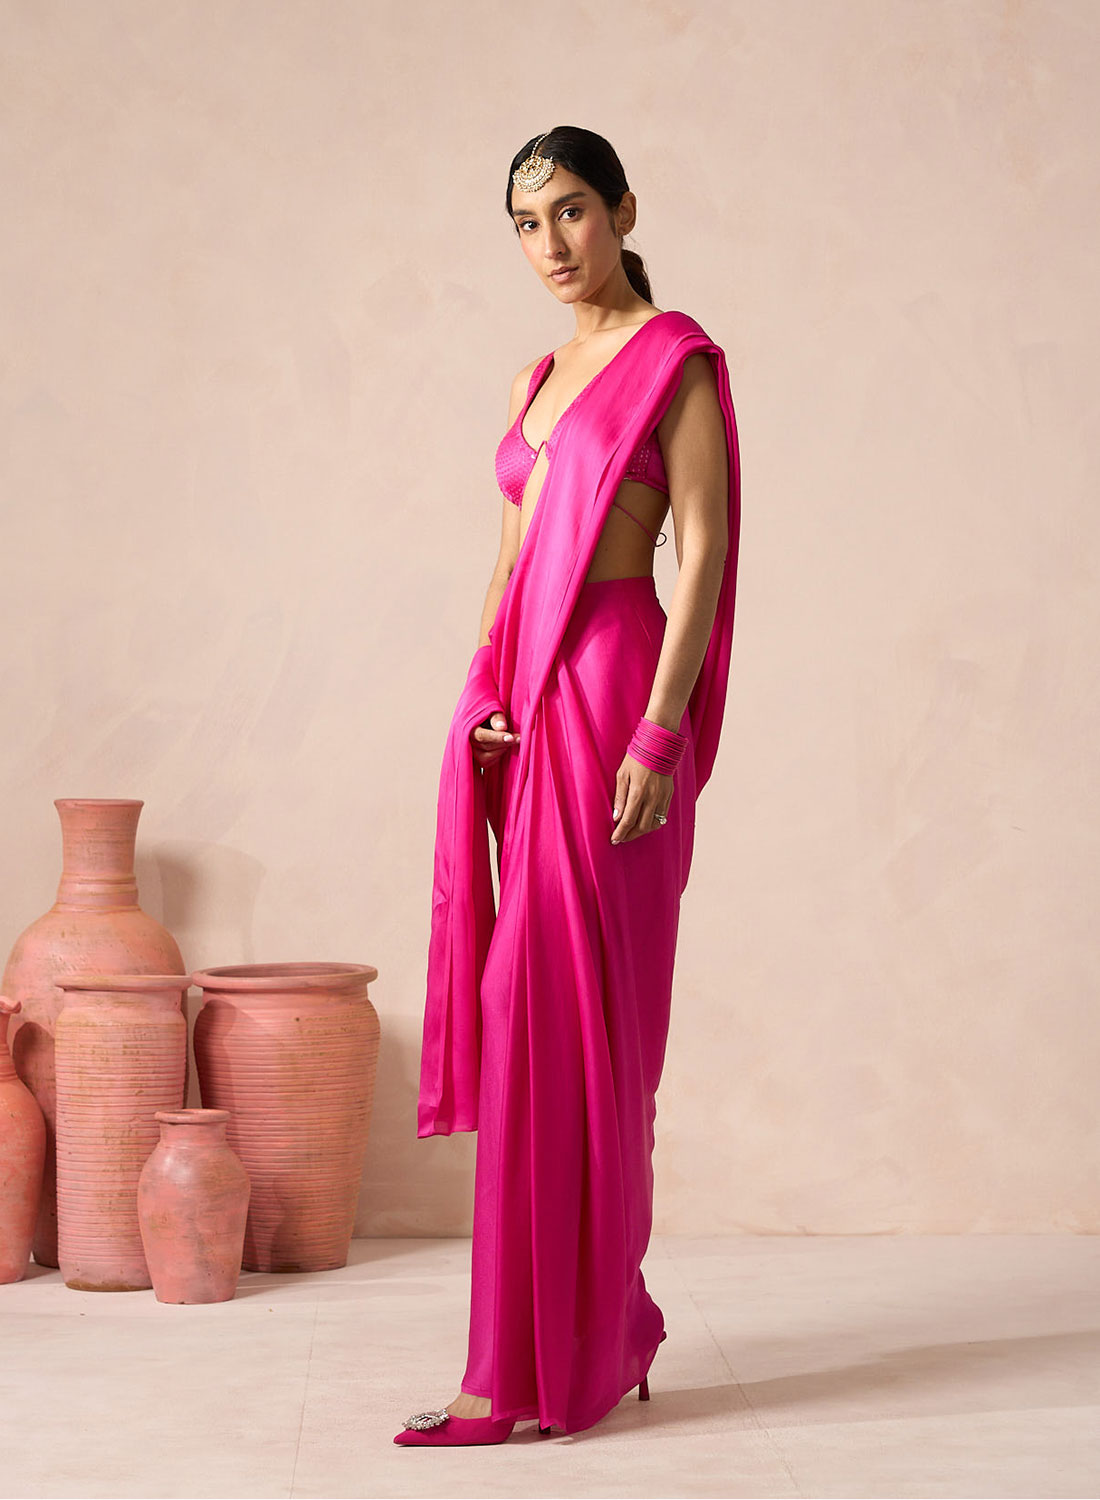 Raadha Pink Satin Pre-drapped Saree With Matching Beads Work Blouse